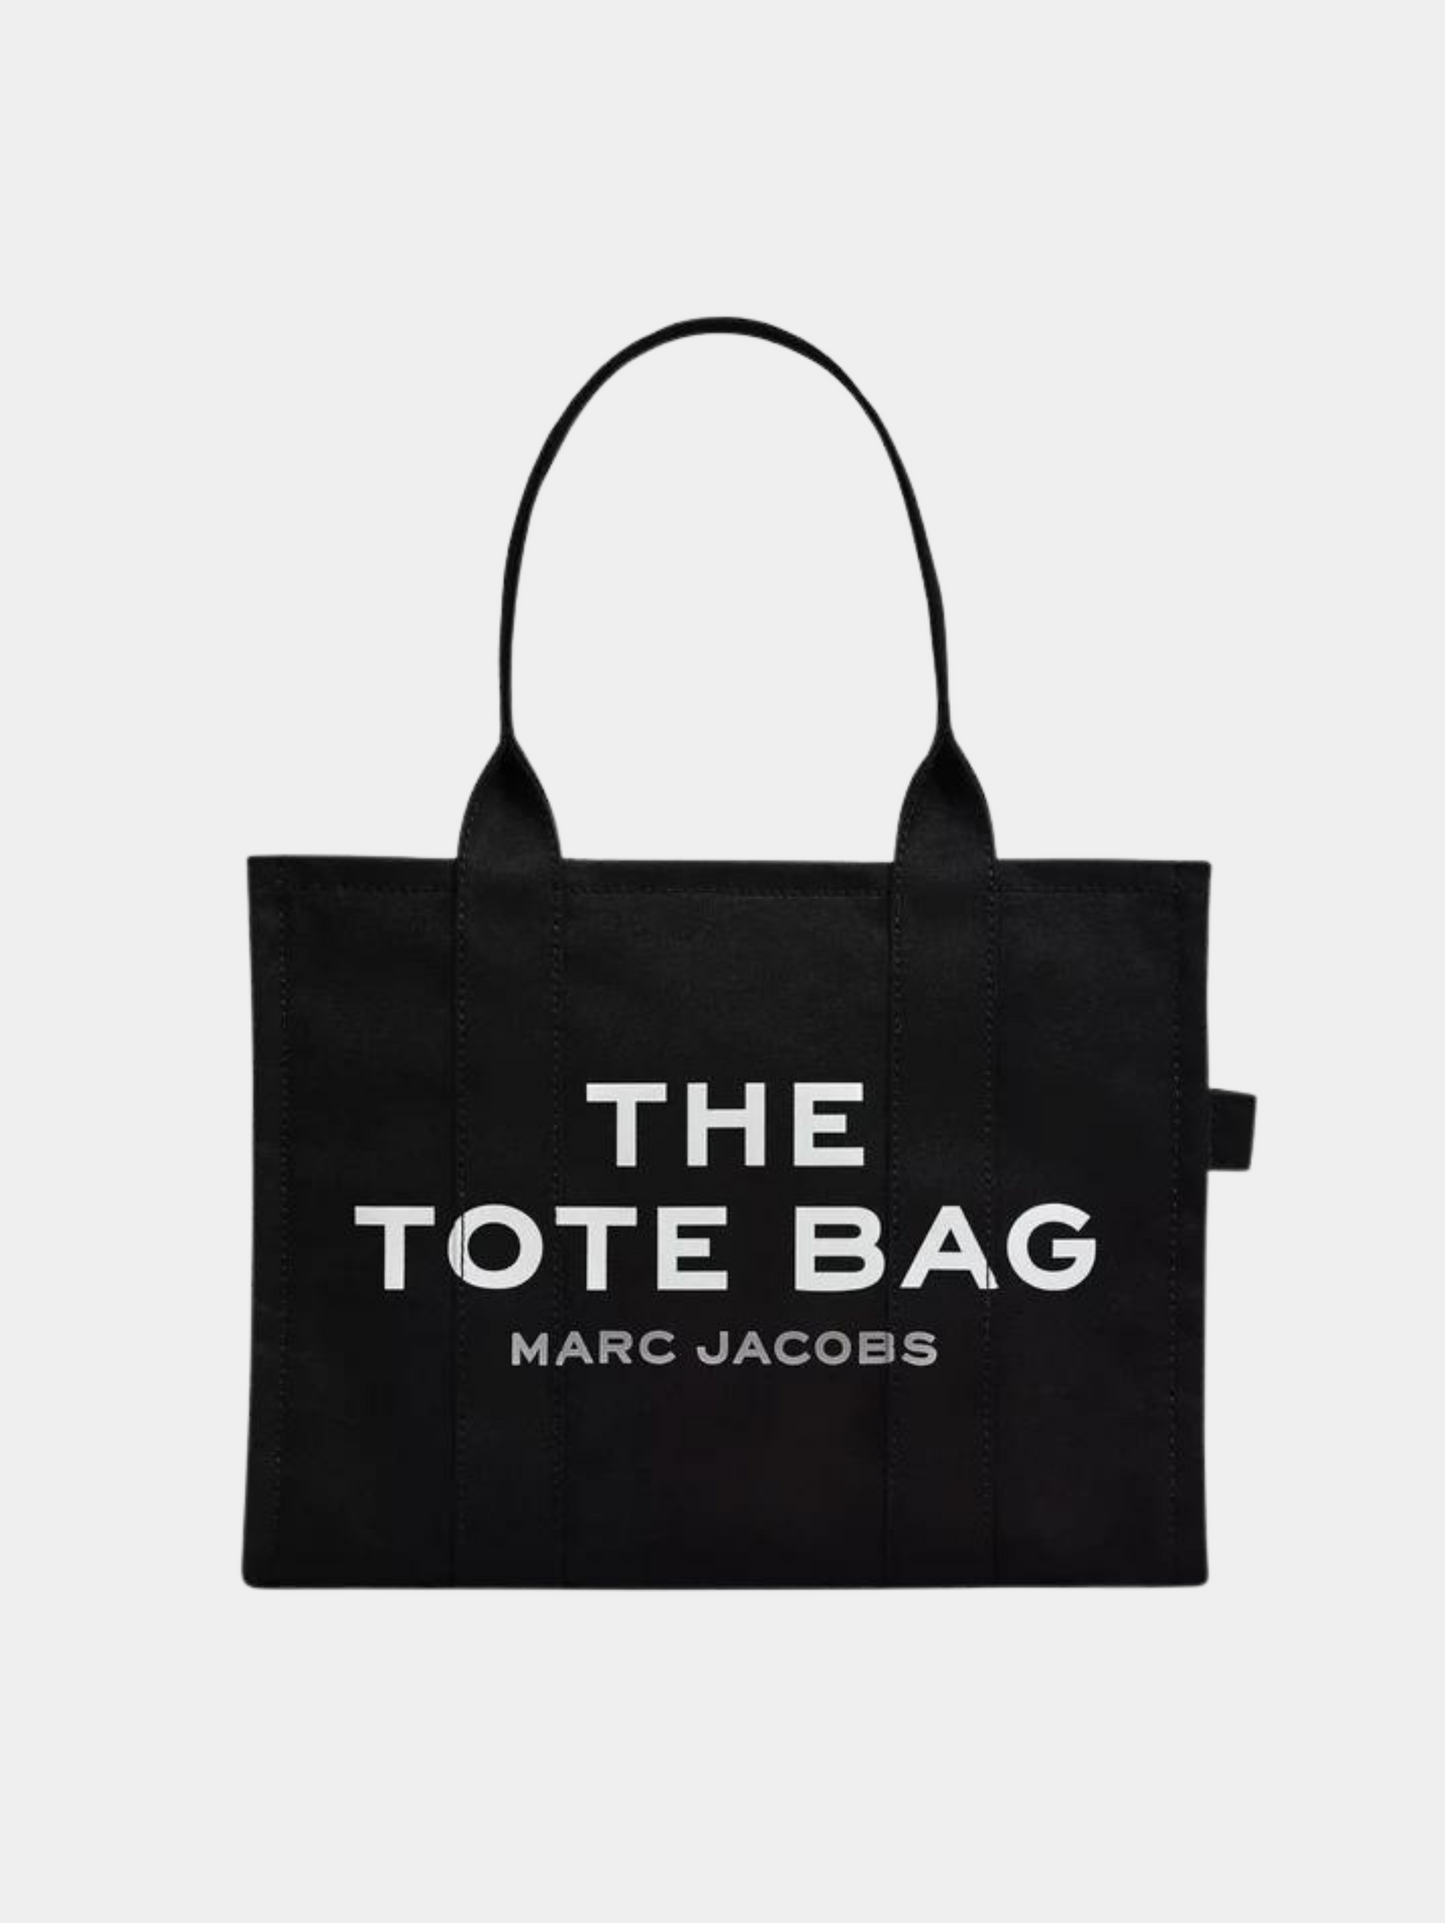 The large tote bag